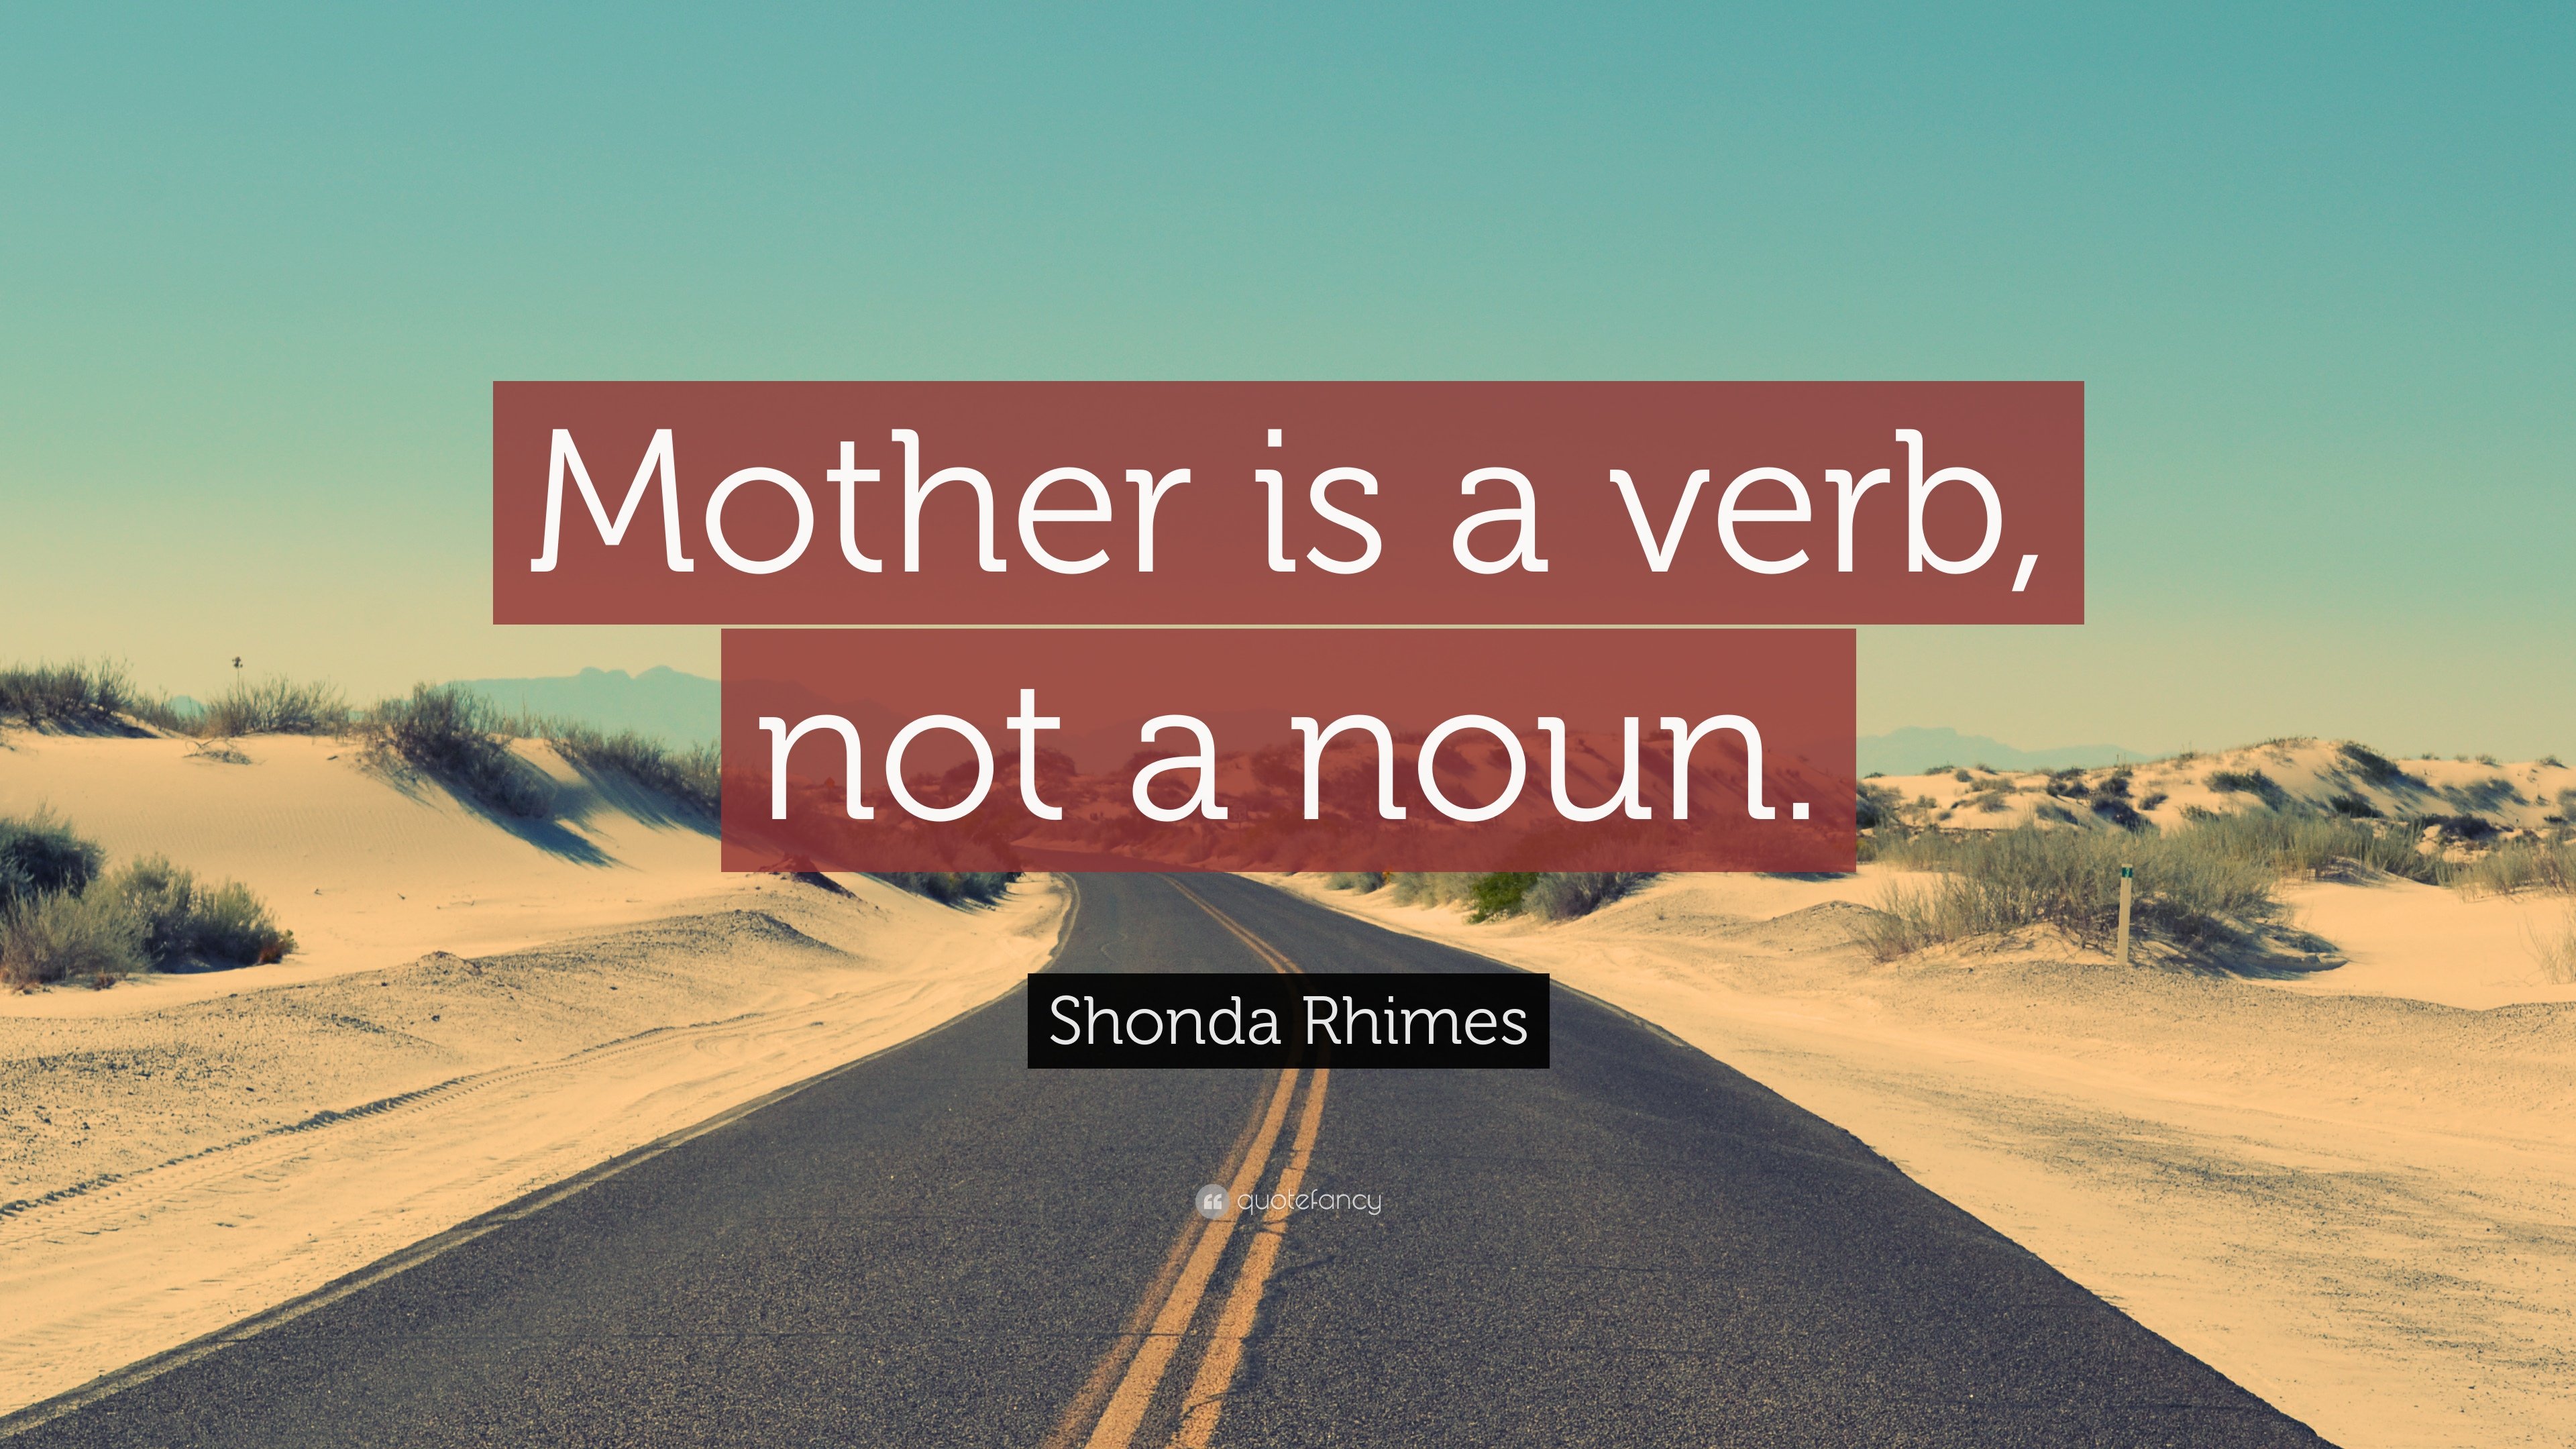 Shonda Rhimes Quote: “Mother is a verb, not a noun.” 12 wallpaper